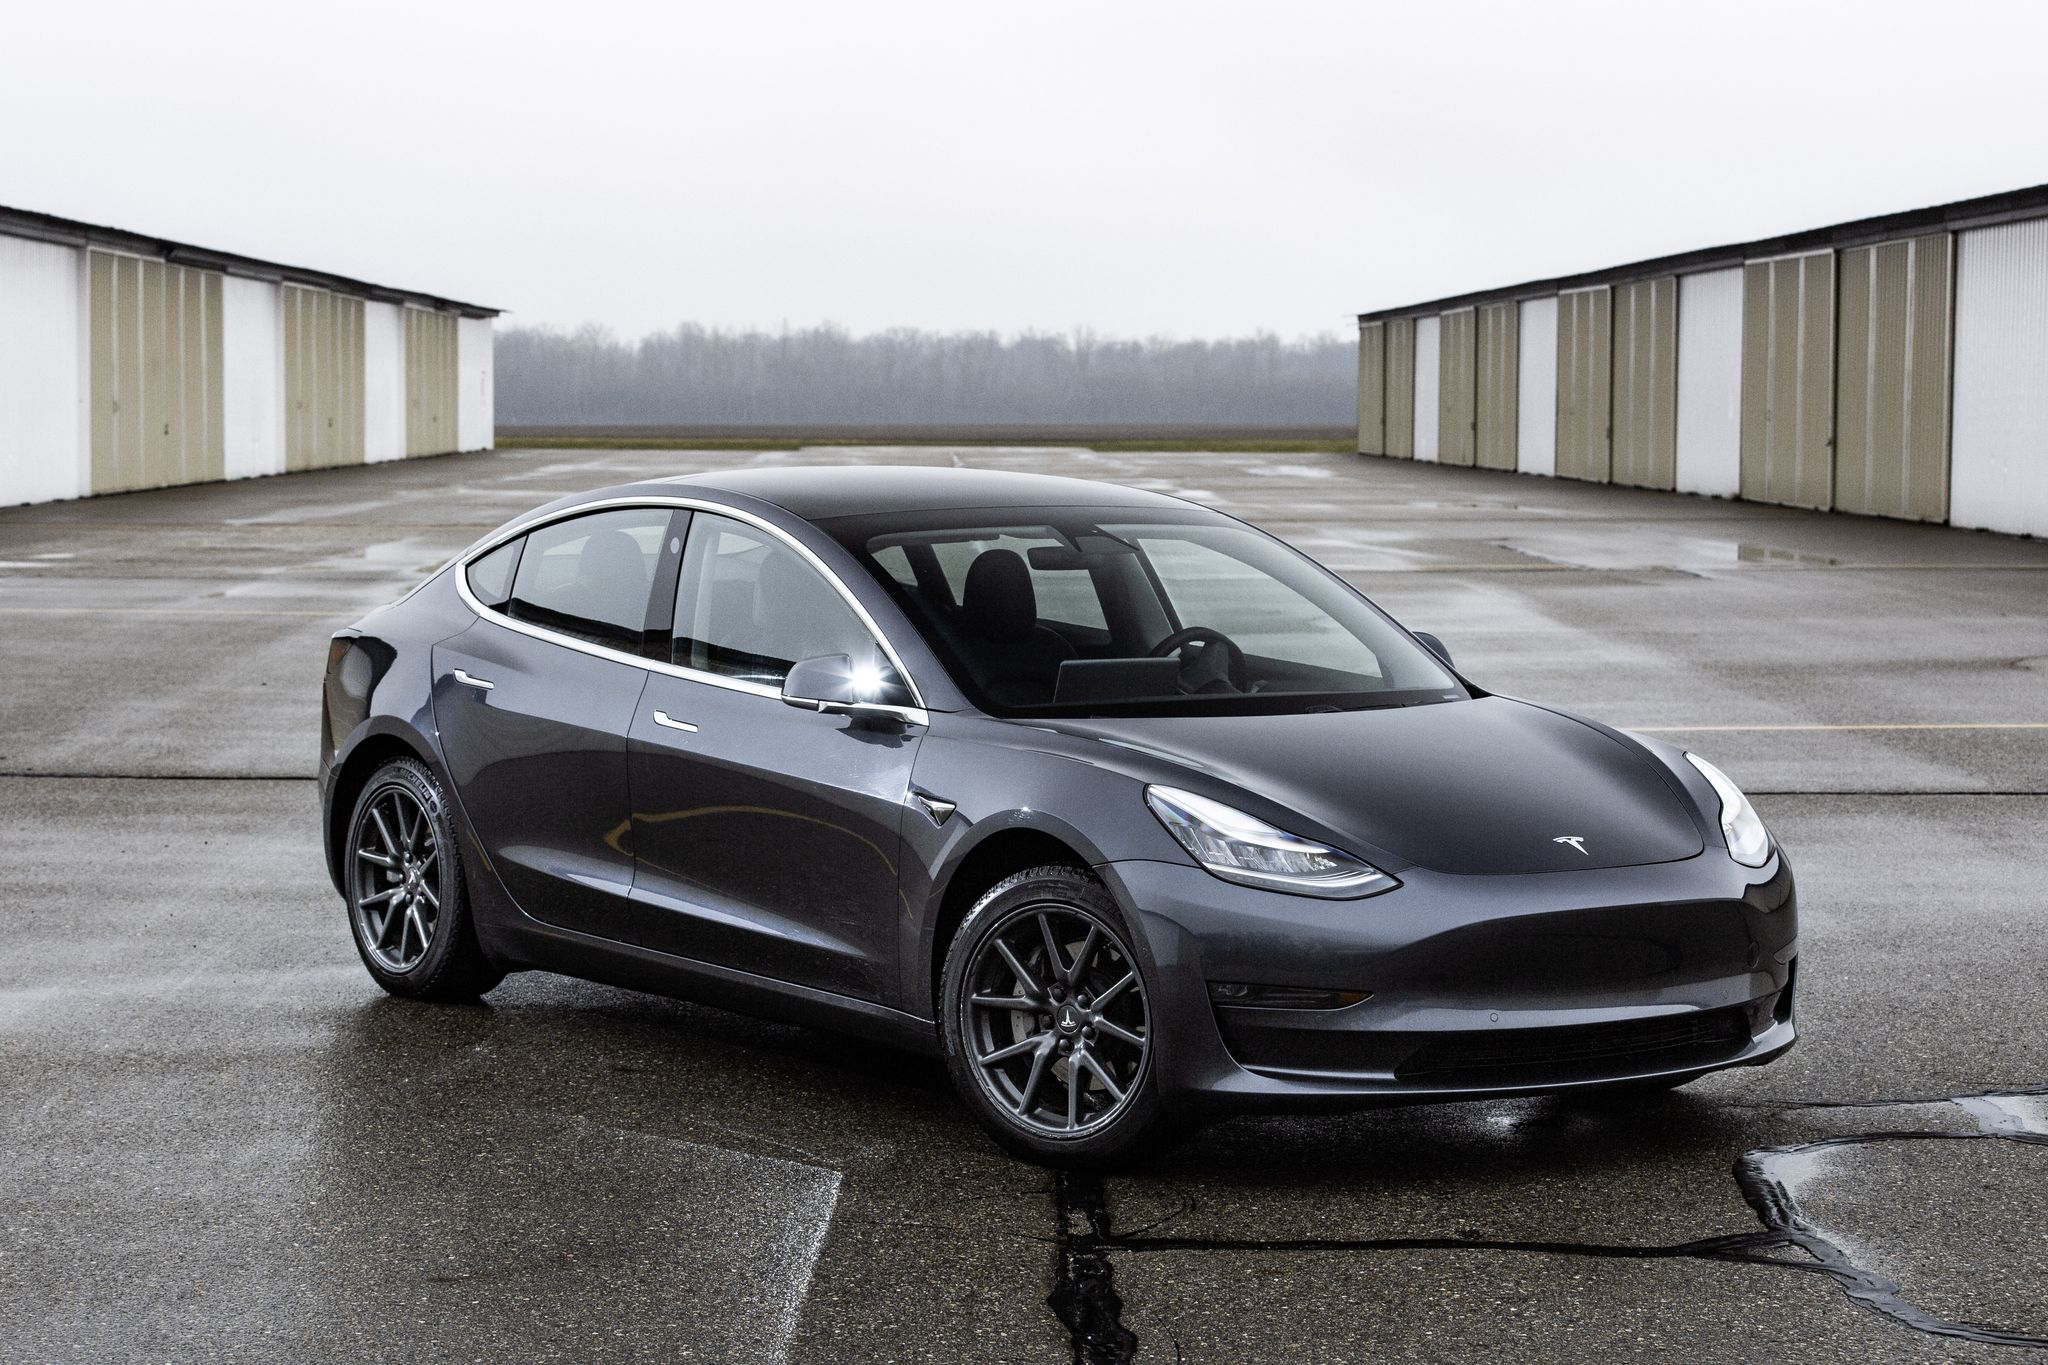 I drove the new Tesla Model 3, here's what got better